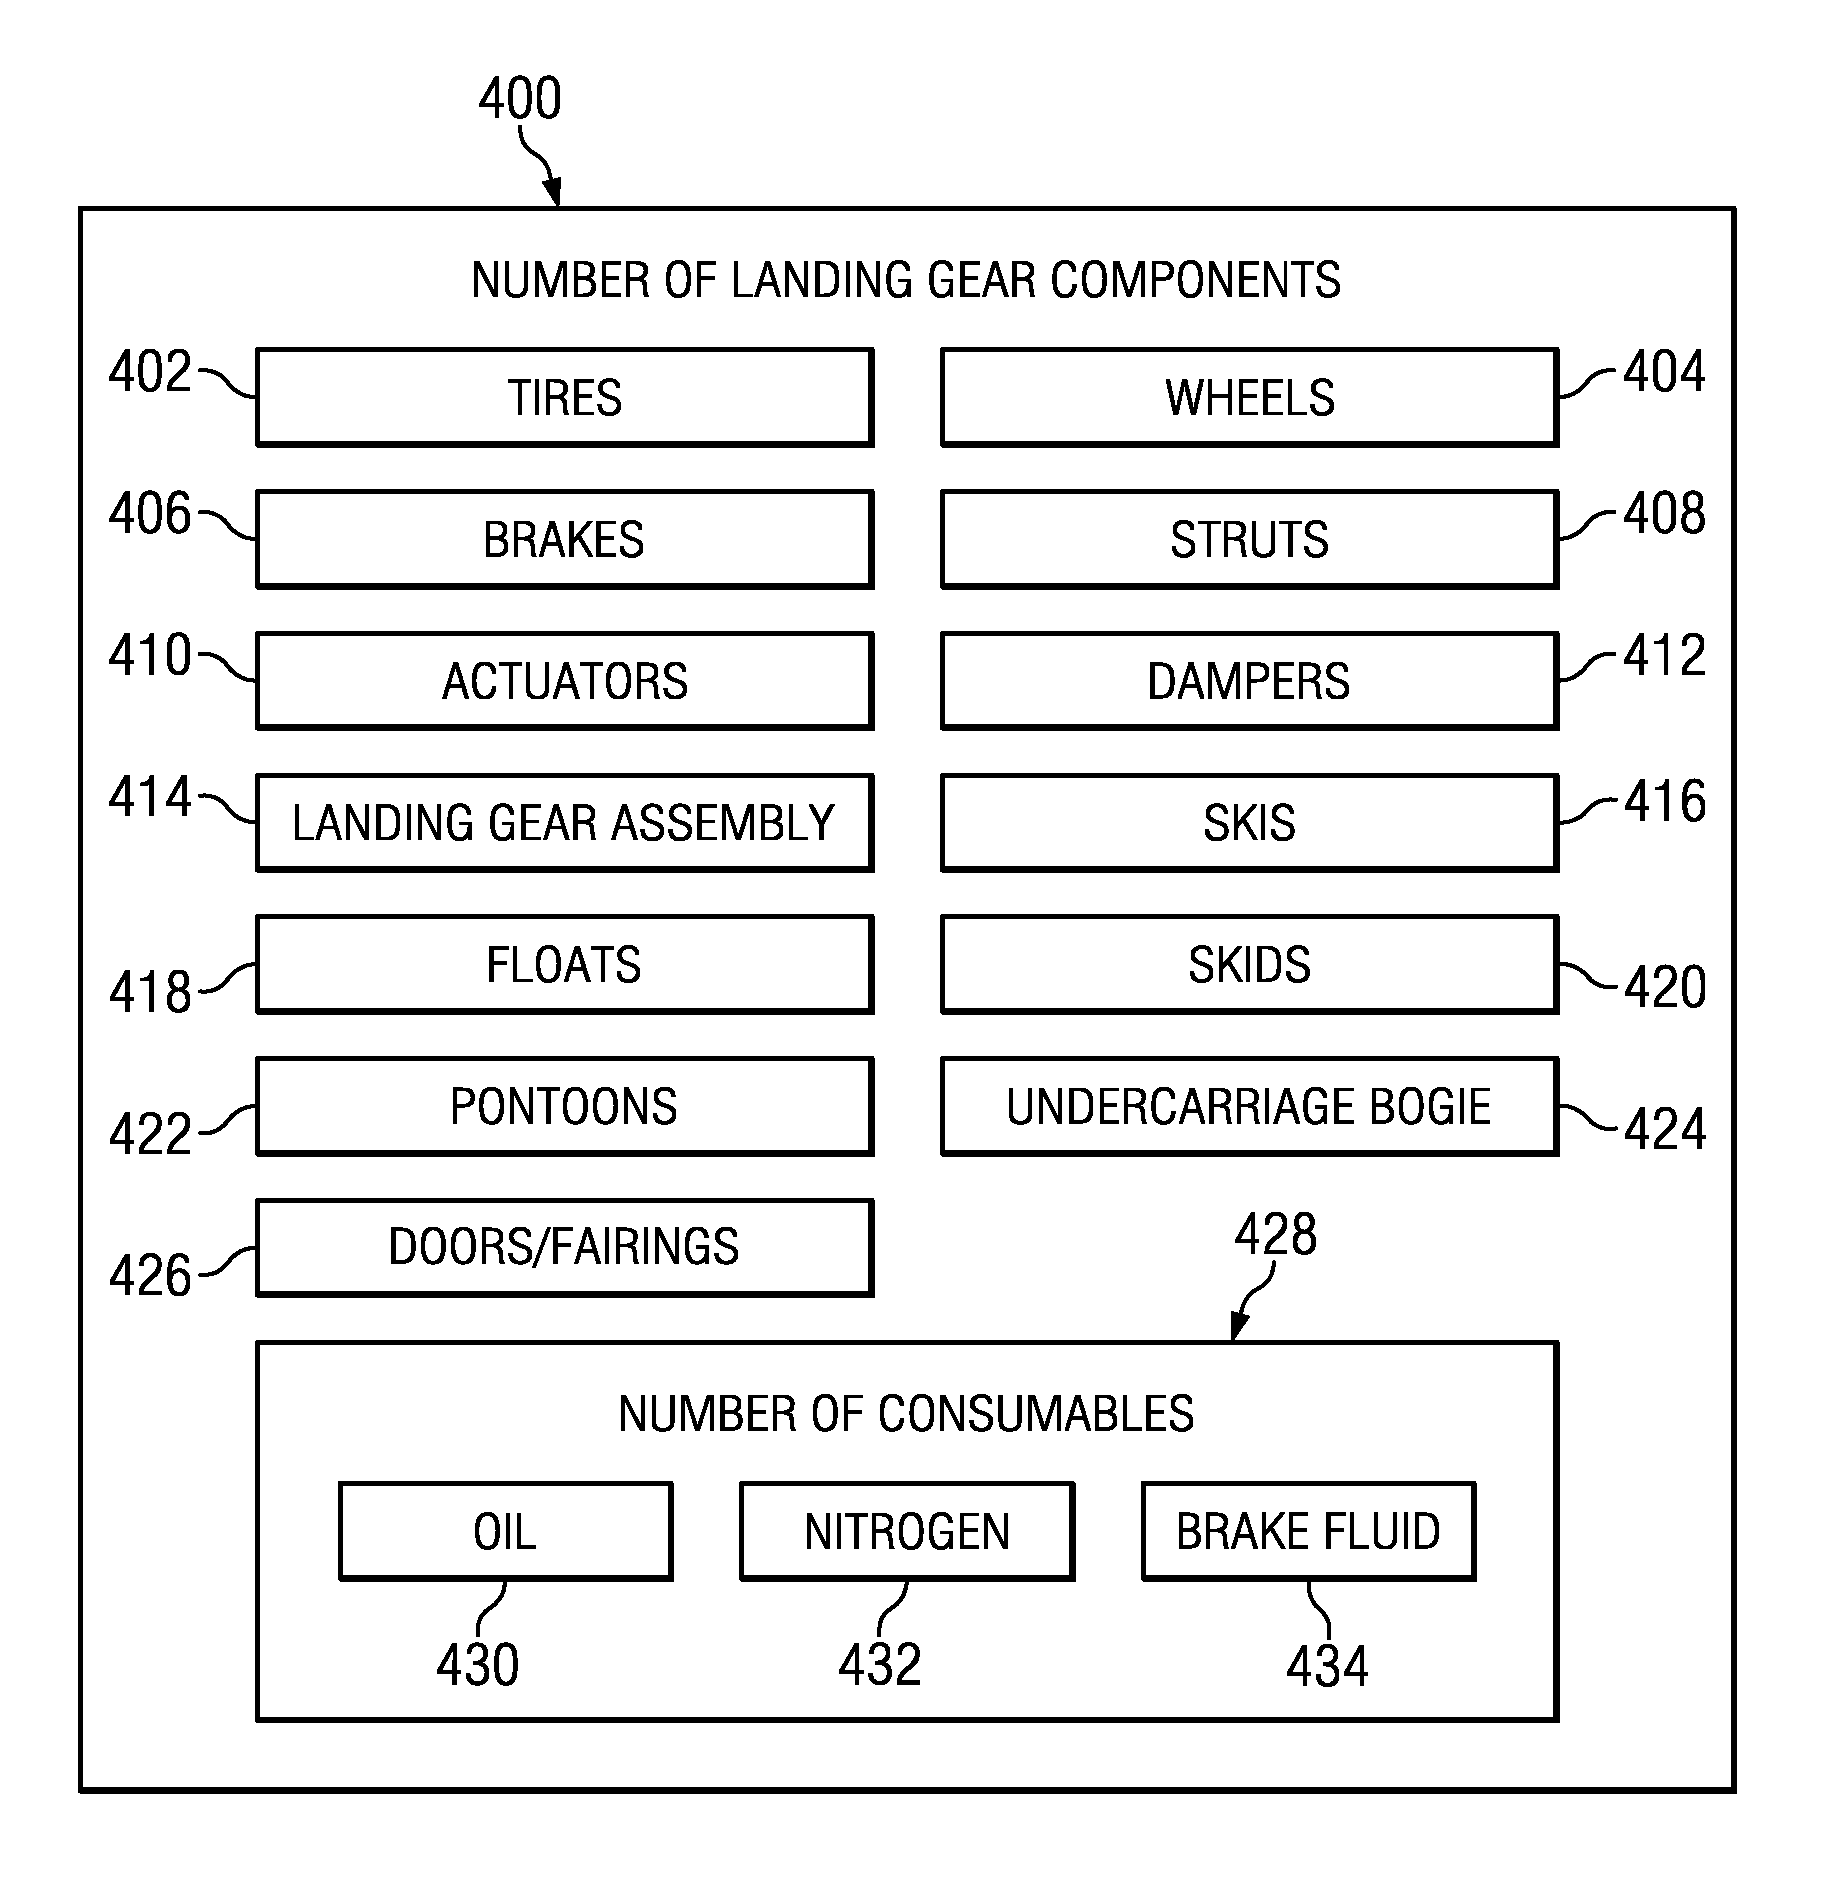 System and method to assess and report the health of landing gear related components